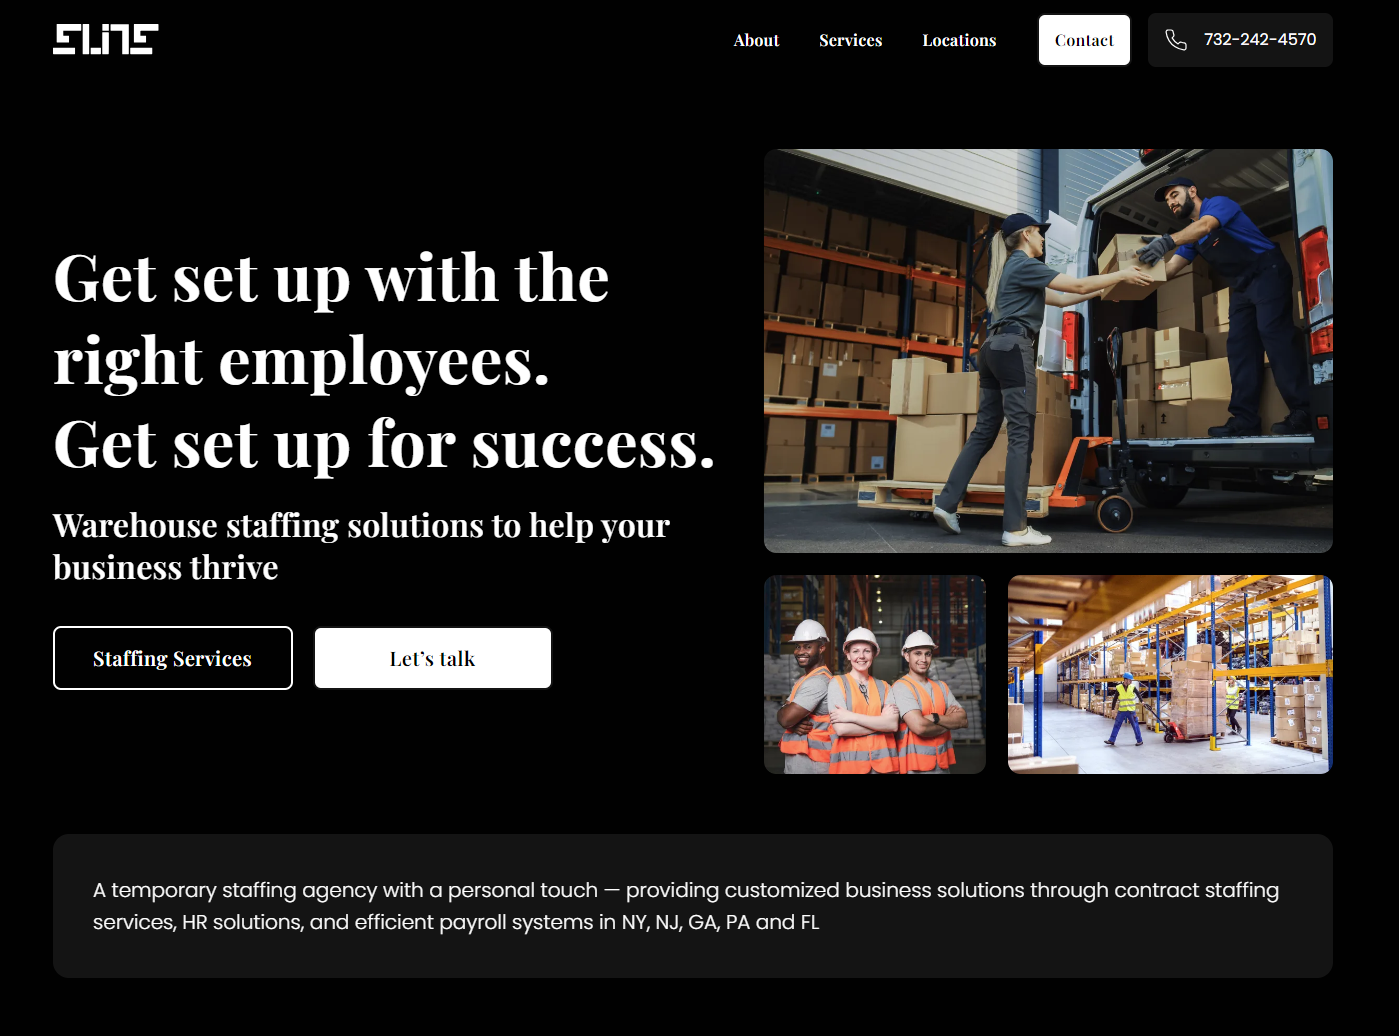 Elite Staffing Solutions Announces Launch of New Website to Enhance Customer Experience through Expanded Temporary Staffing Services